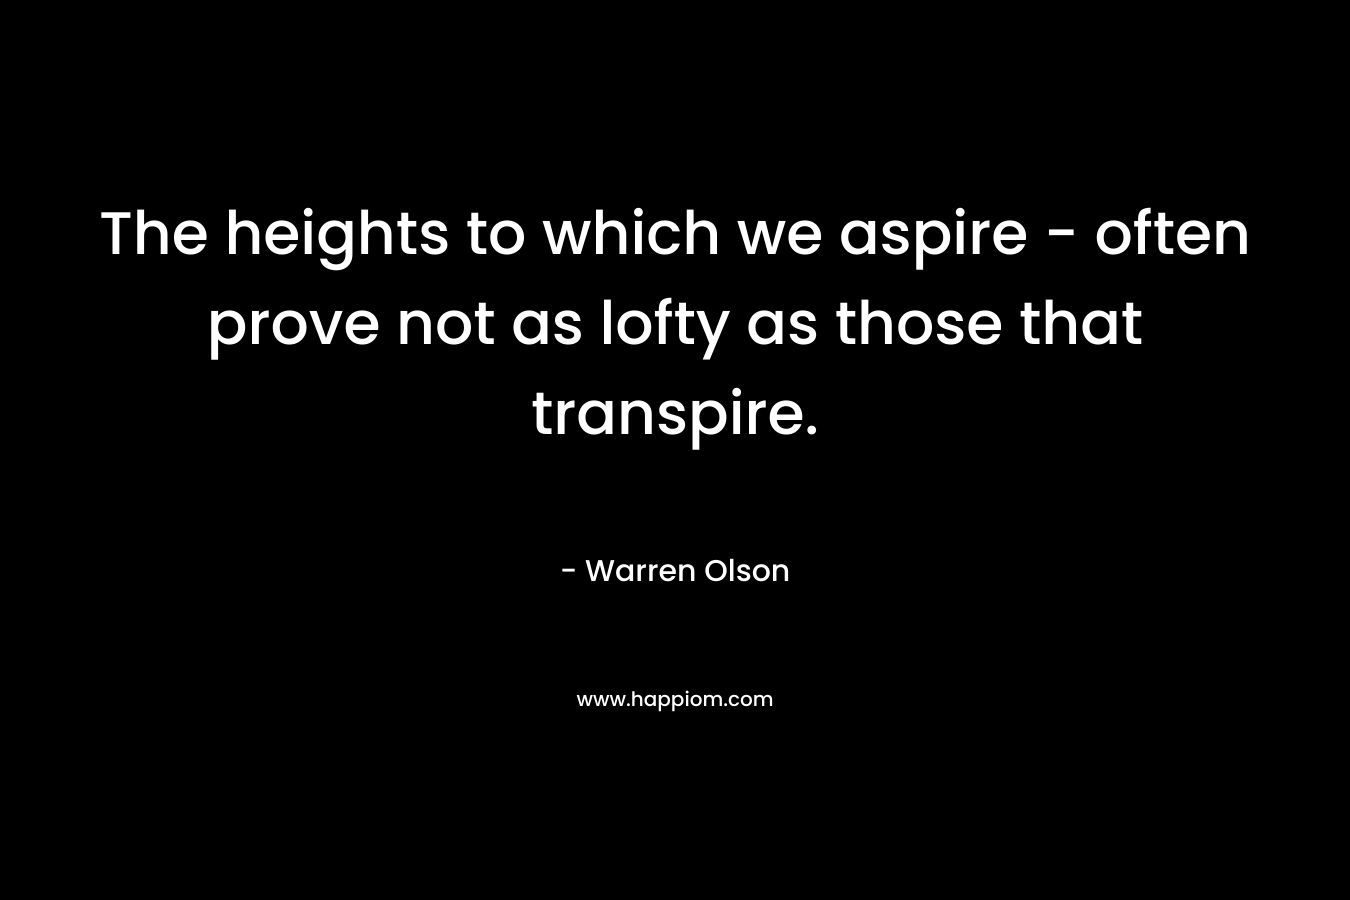 The heights to which we aspire - often prove not as lofty as those that transpire.